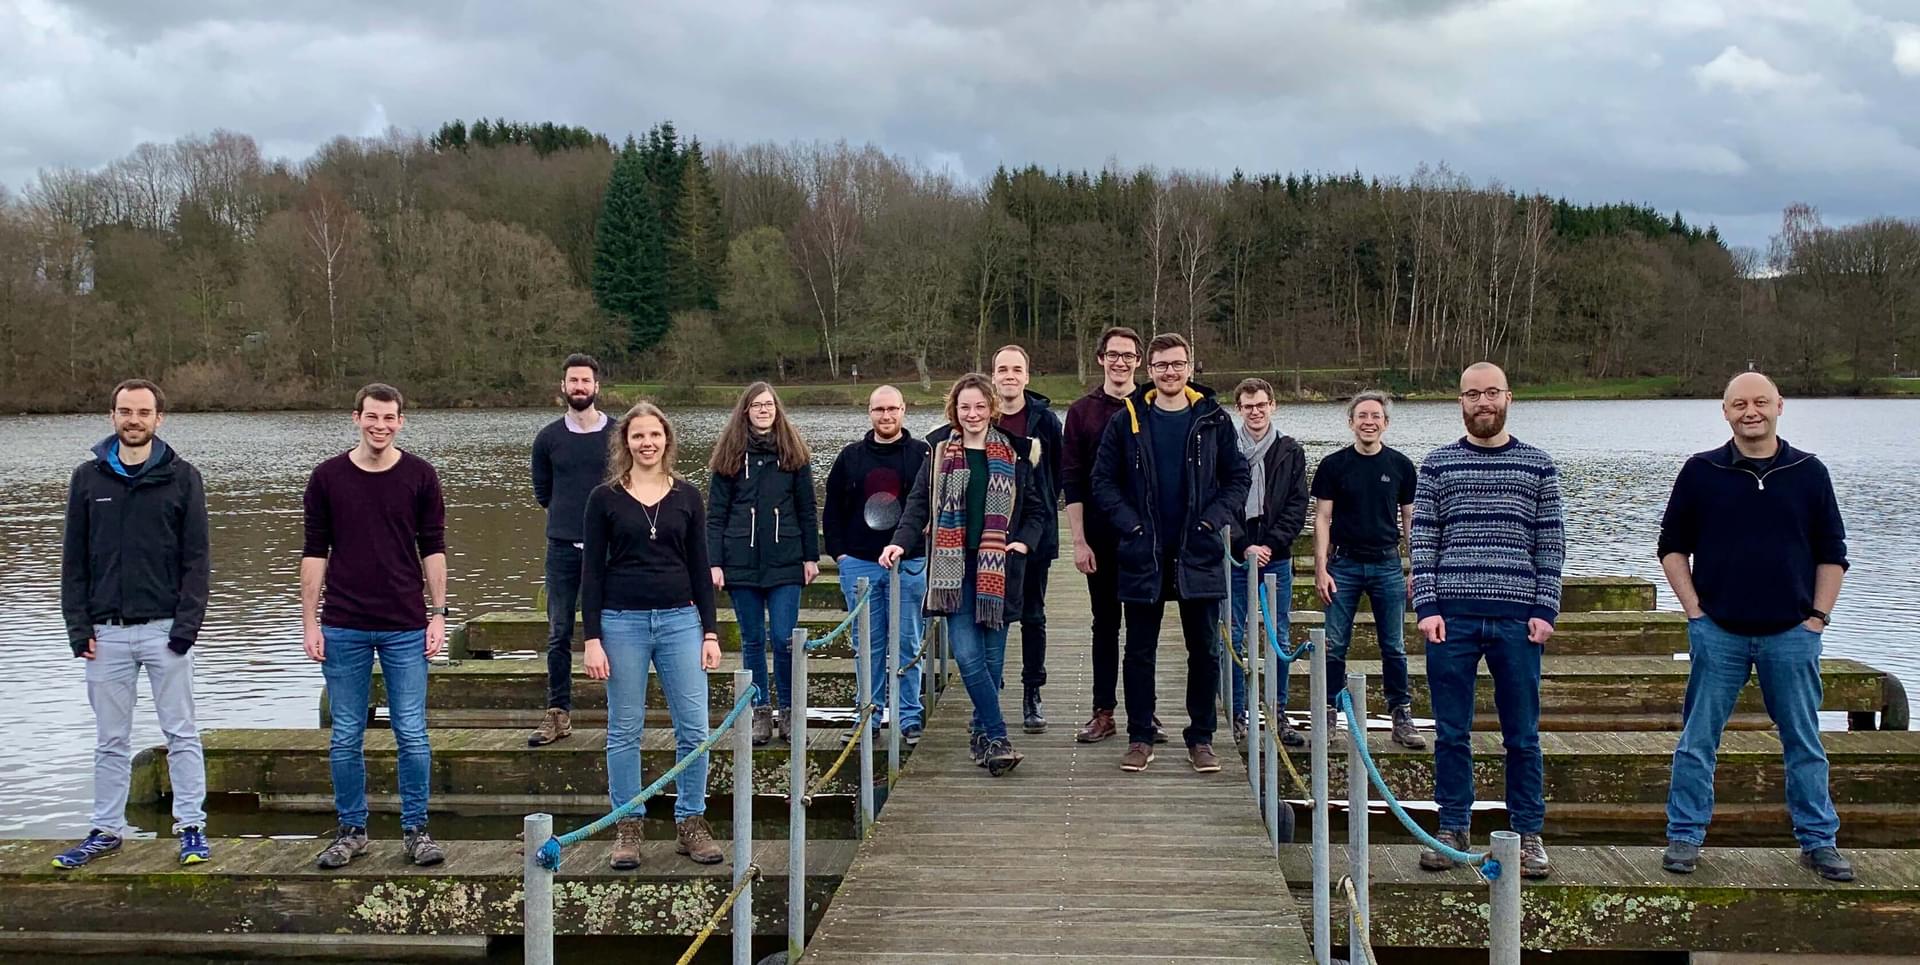 group photo of the Reactive System Group in front of a lake